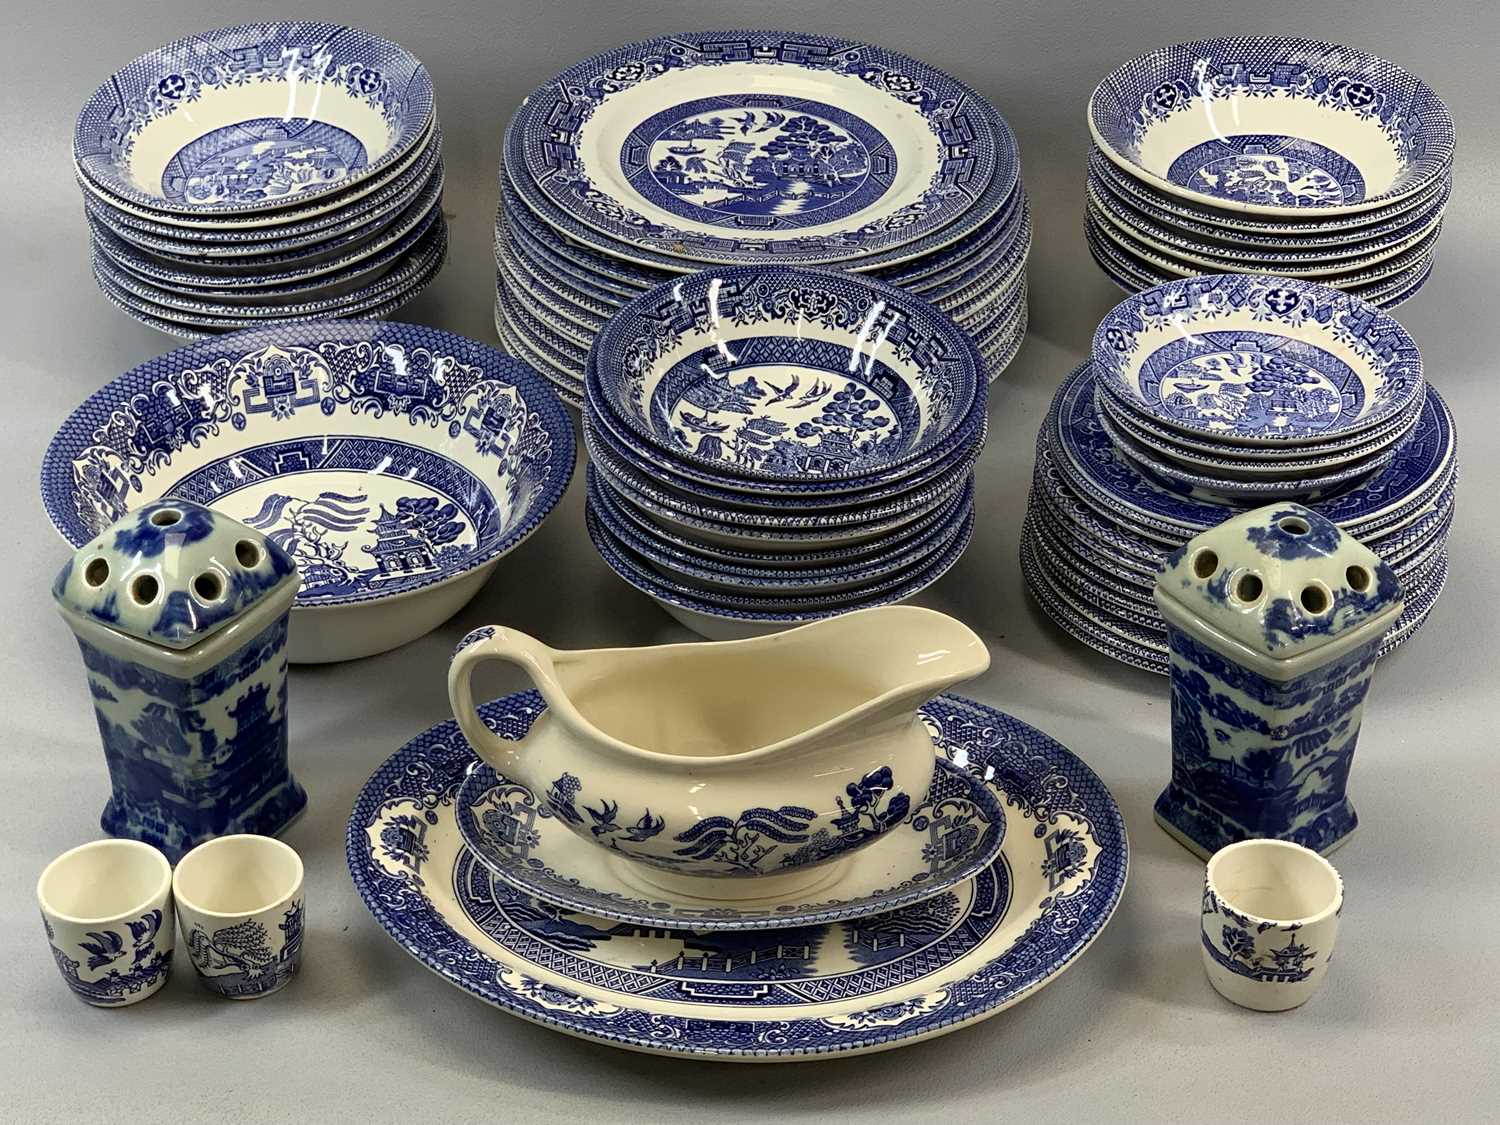 GROUP OF STAFFORDSHIRE POTTERY including Wedgwood blue Jasperware of jugs, plates, posy vases, - Image 4 of 5